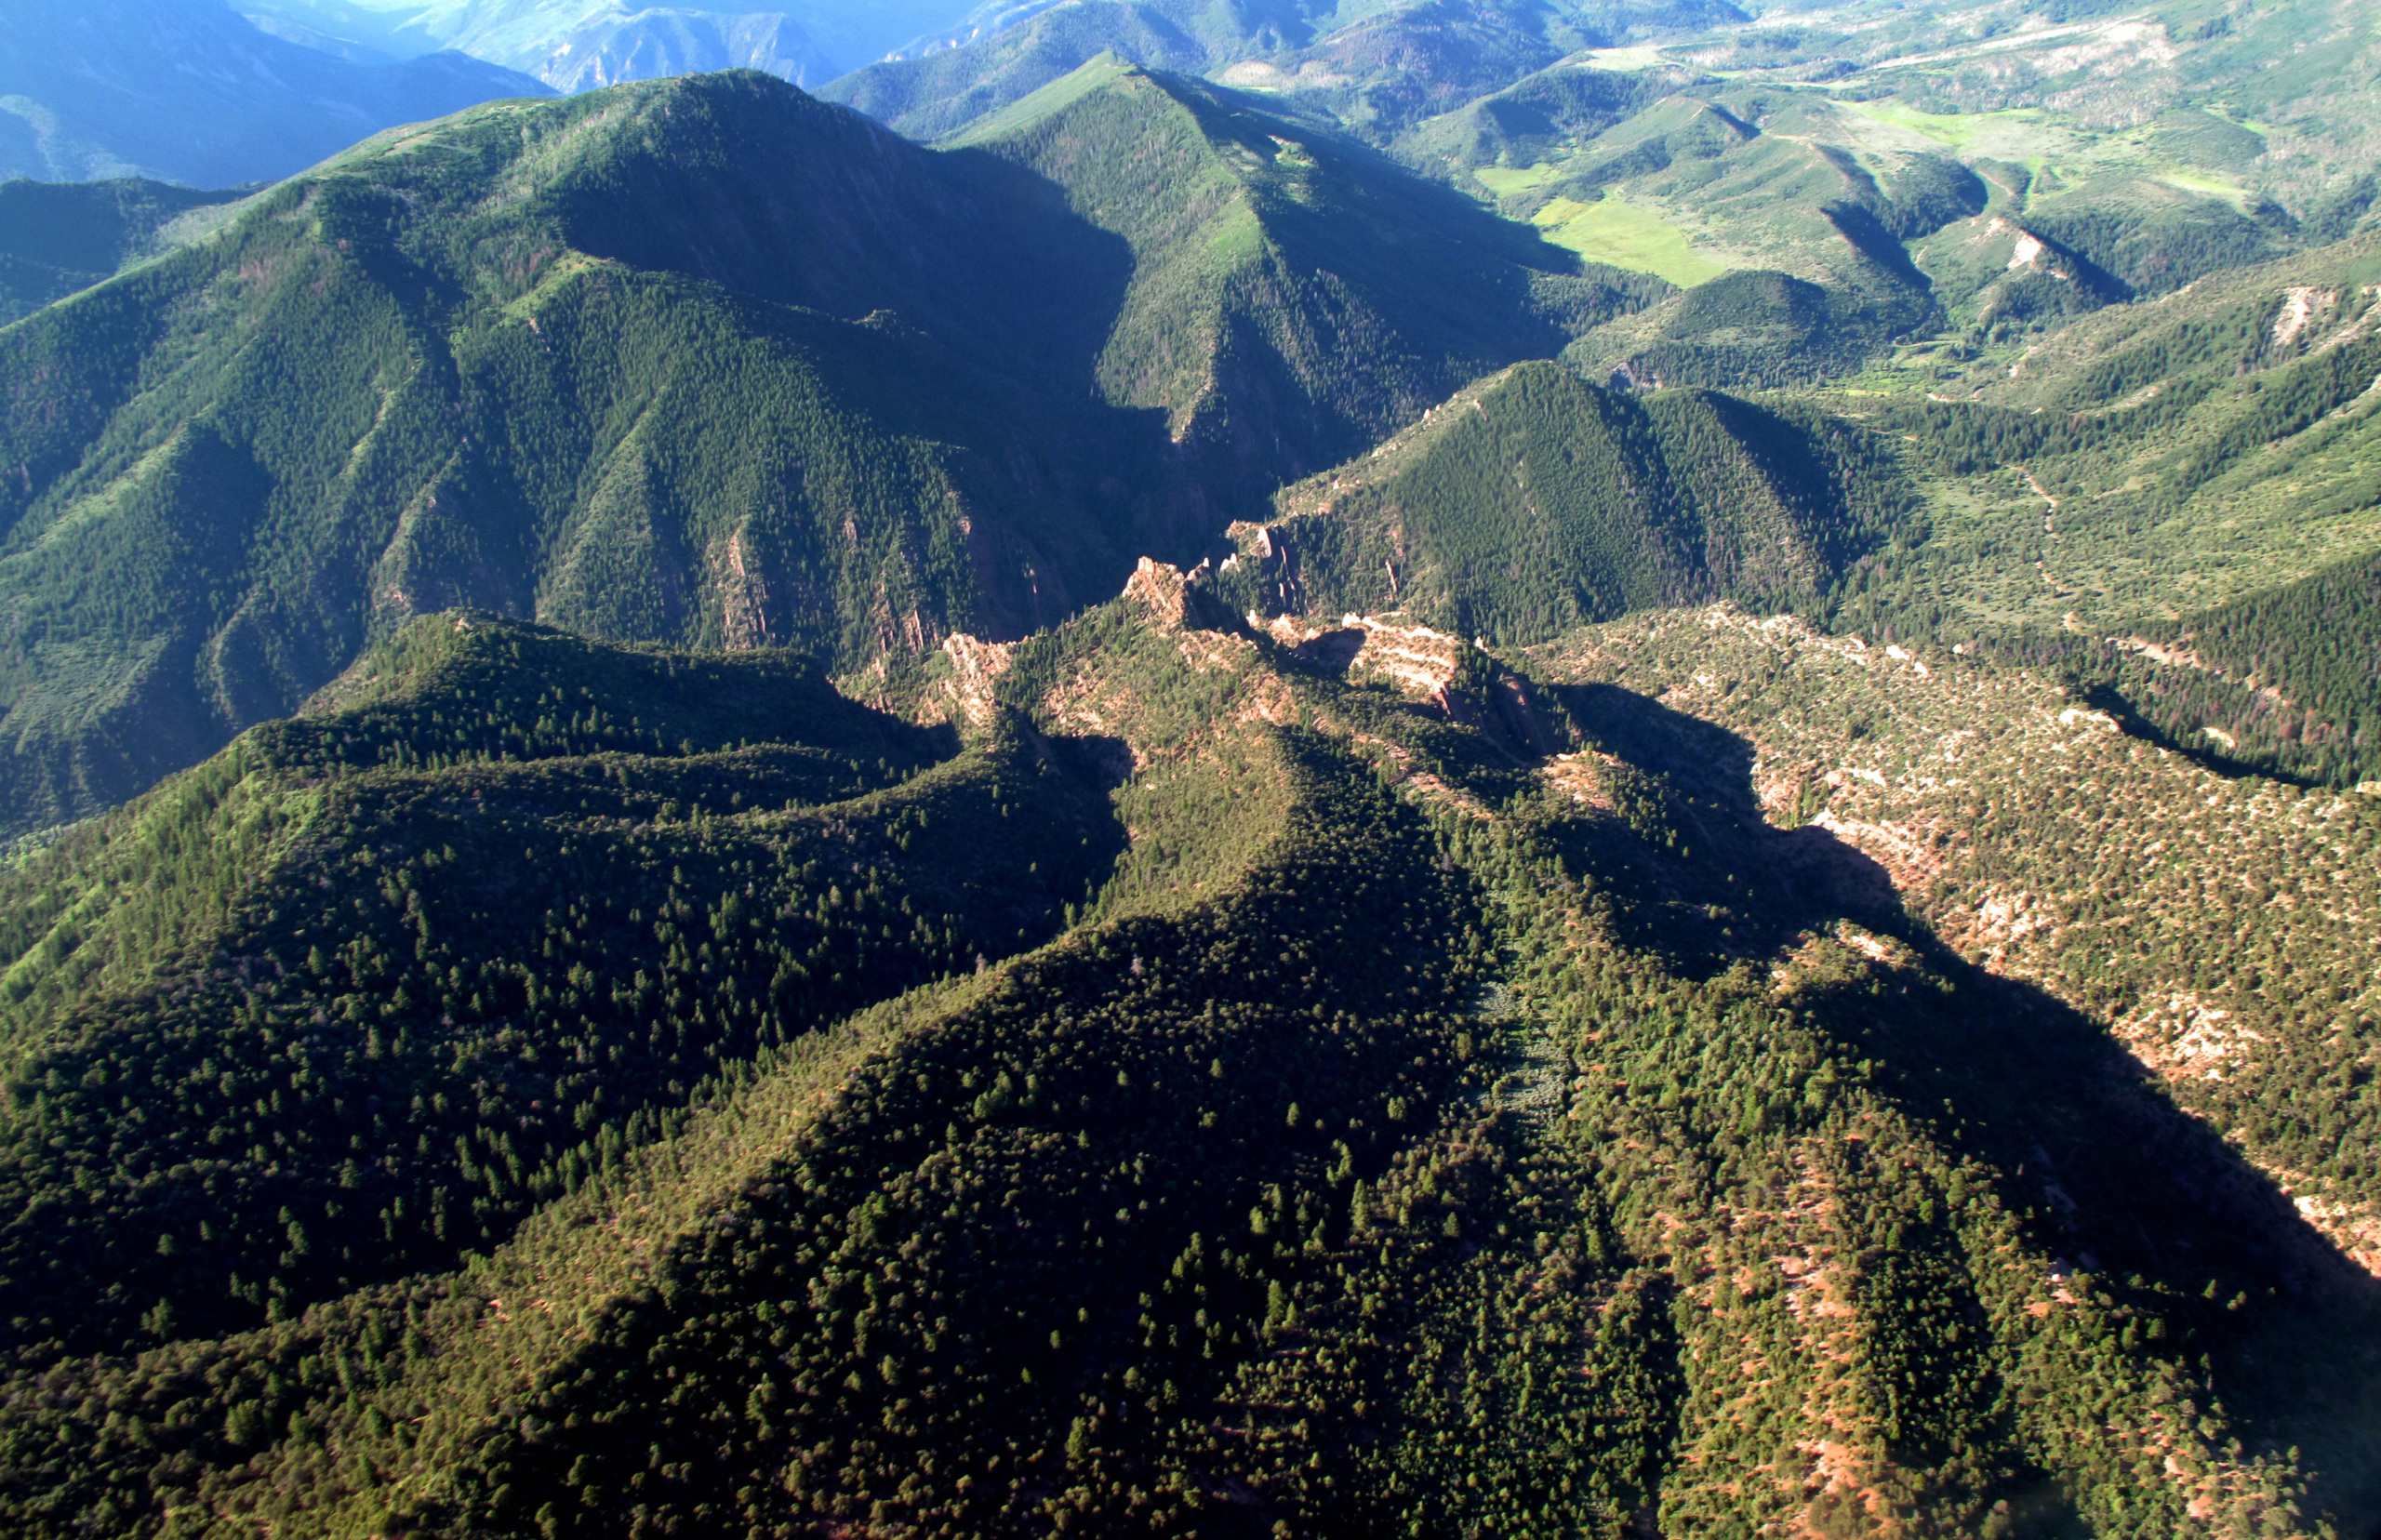 Thompson divide aerial shot -shows green mountains with dramatic shadows